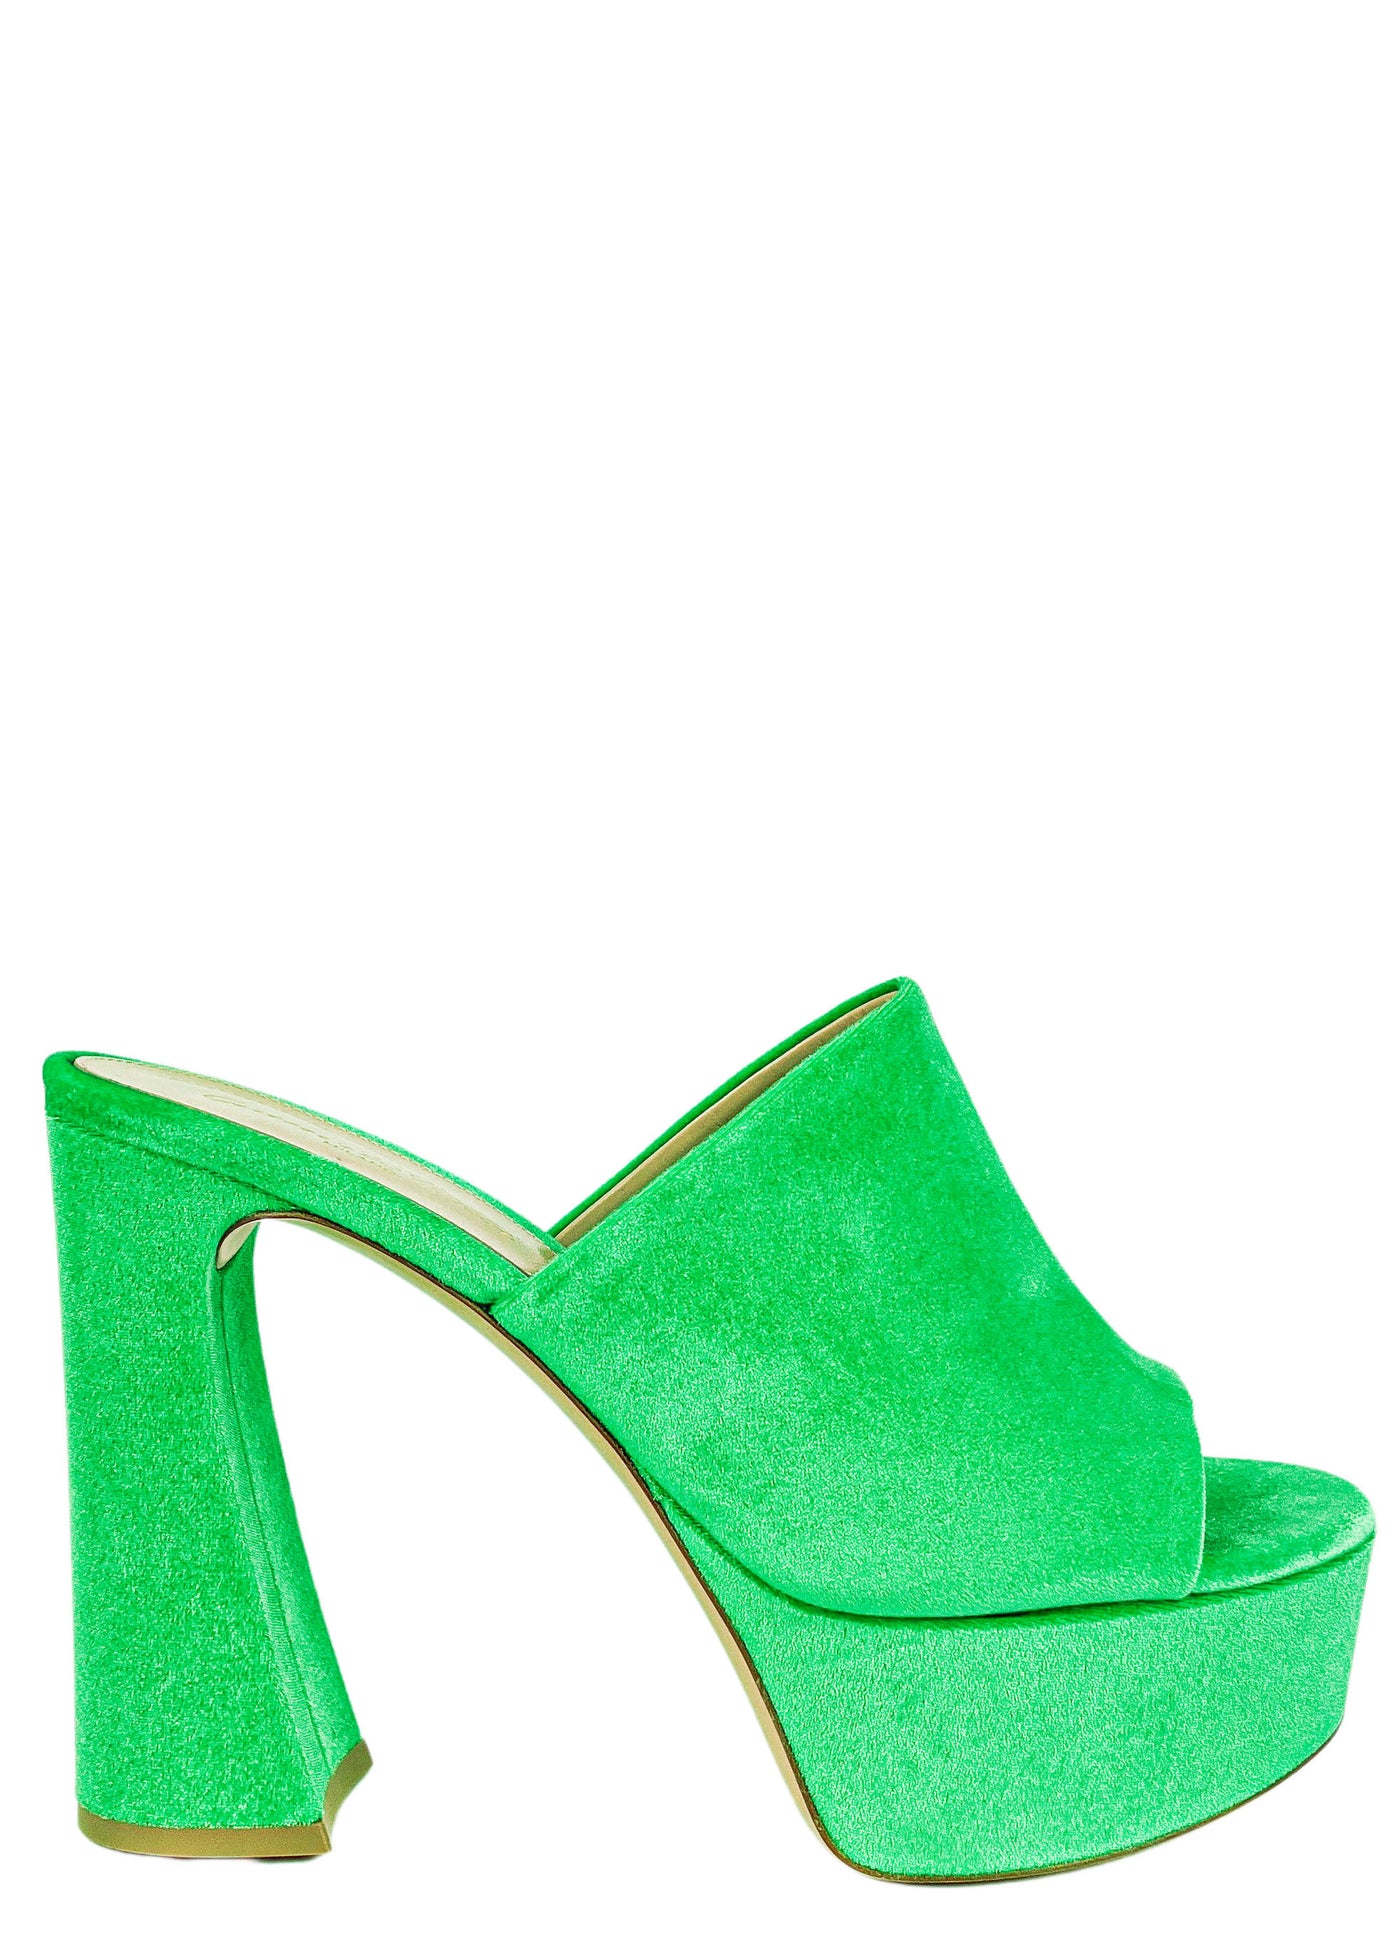 Gianvito Rossi Holly Mules in Chenille Green - Discounts on Gianvito Rossi at UAL